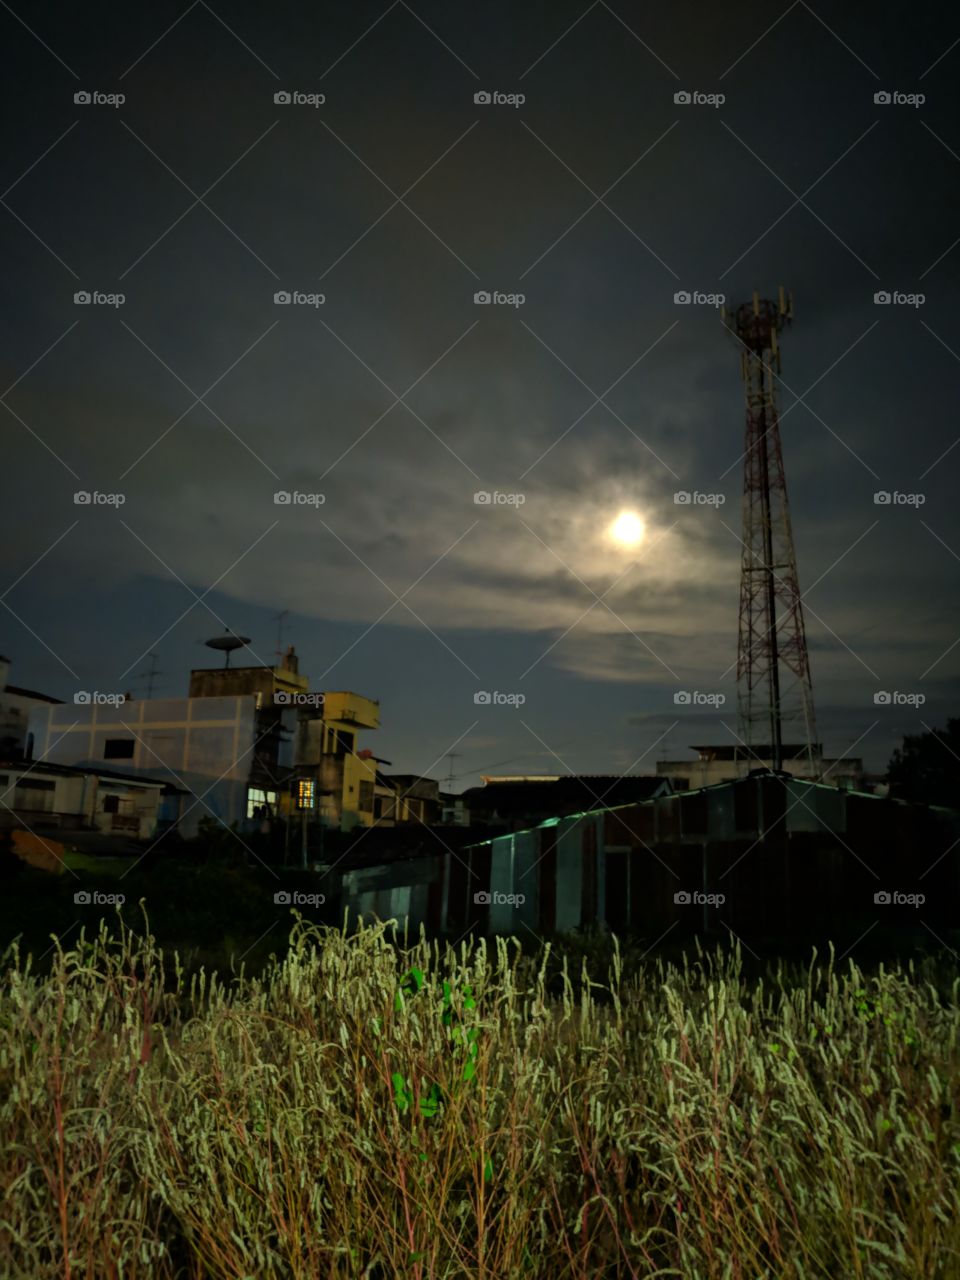 Full moon sky with green grasses. Mobile pole contrast with the sky